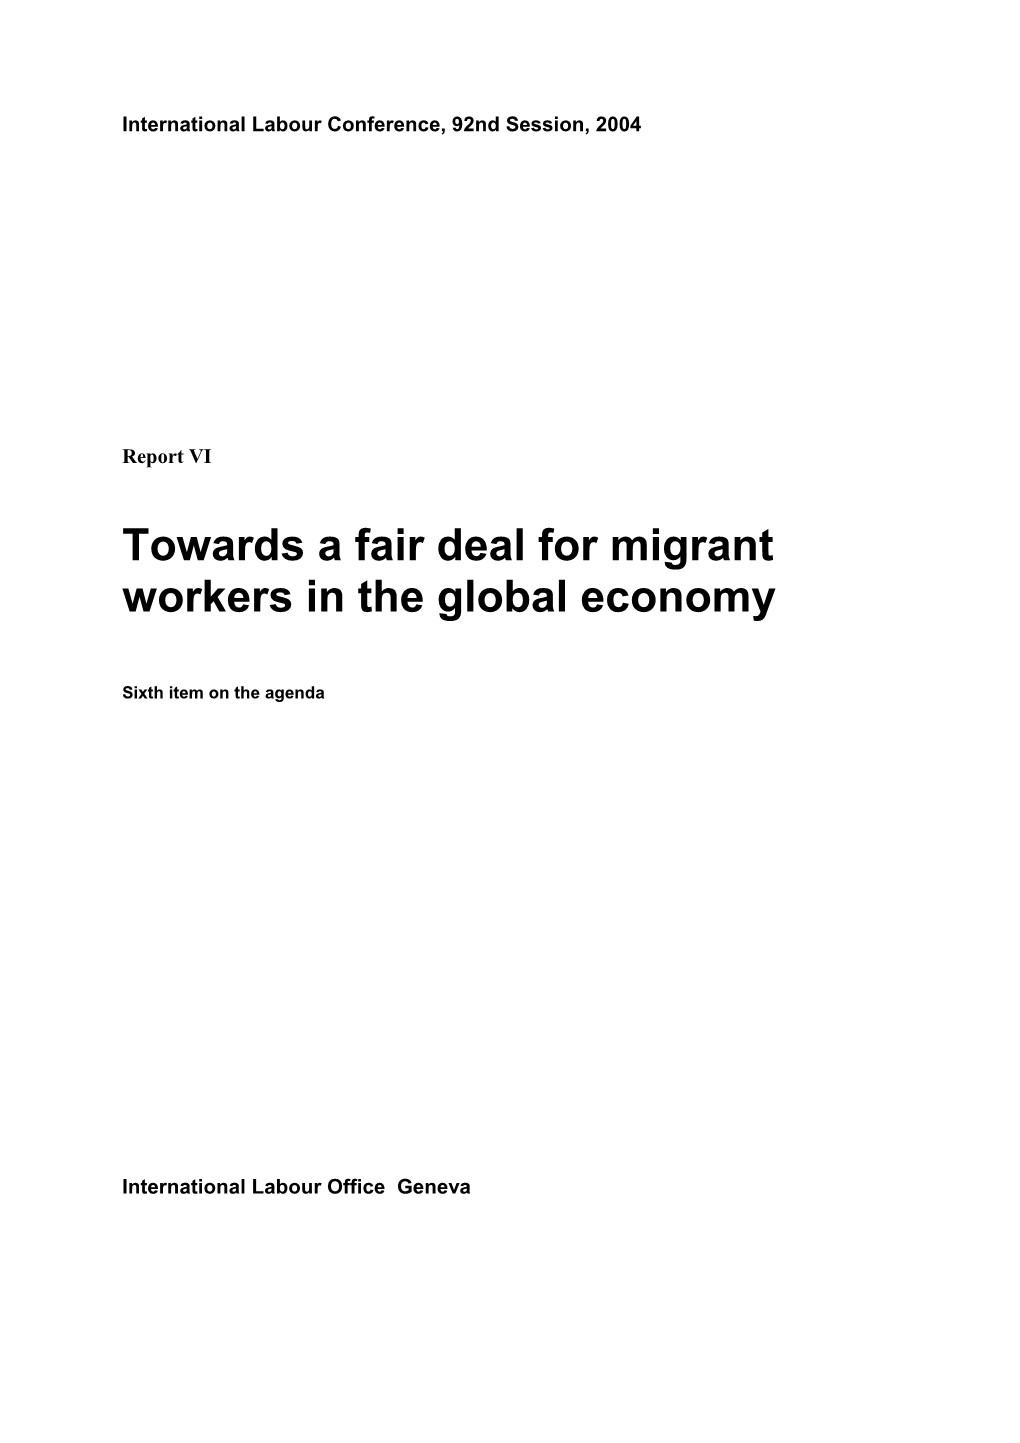 Towards a Fair Deal for Migrant Workers in the Global Economy